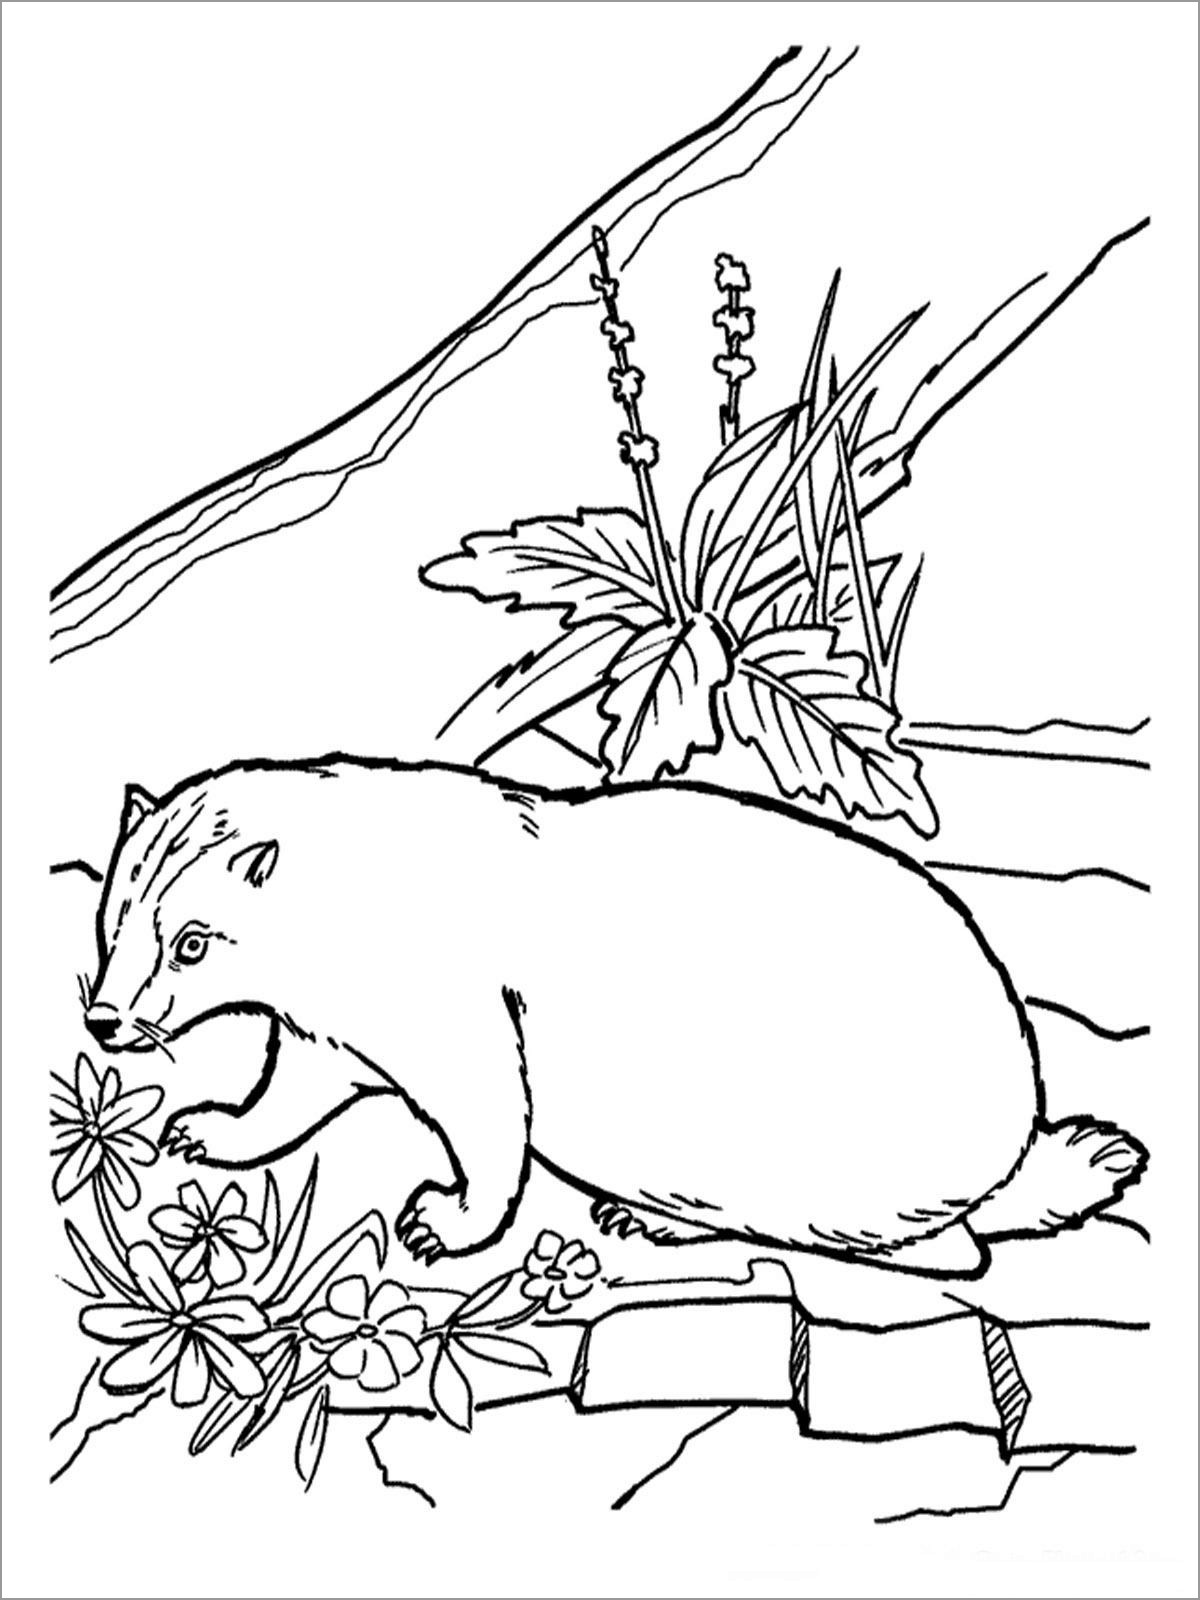 Honey Badger Coloring Pages